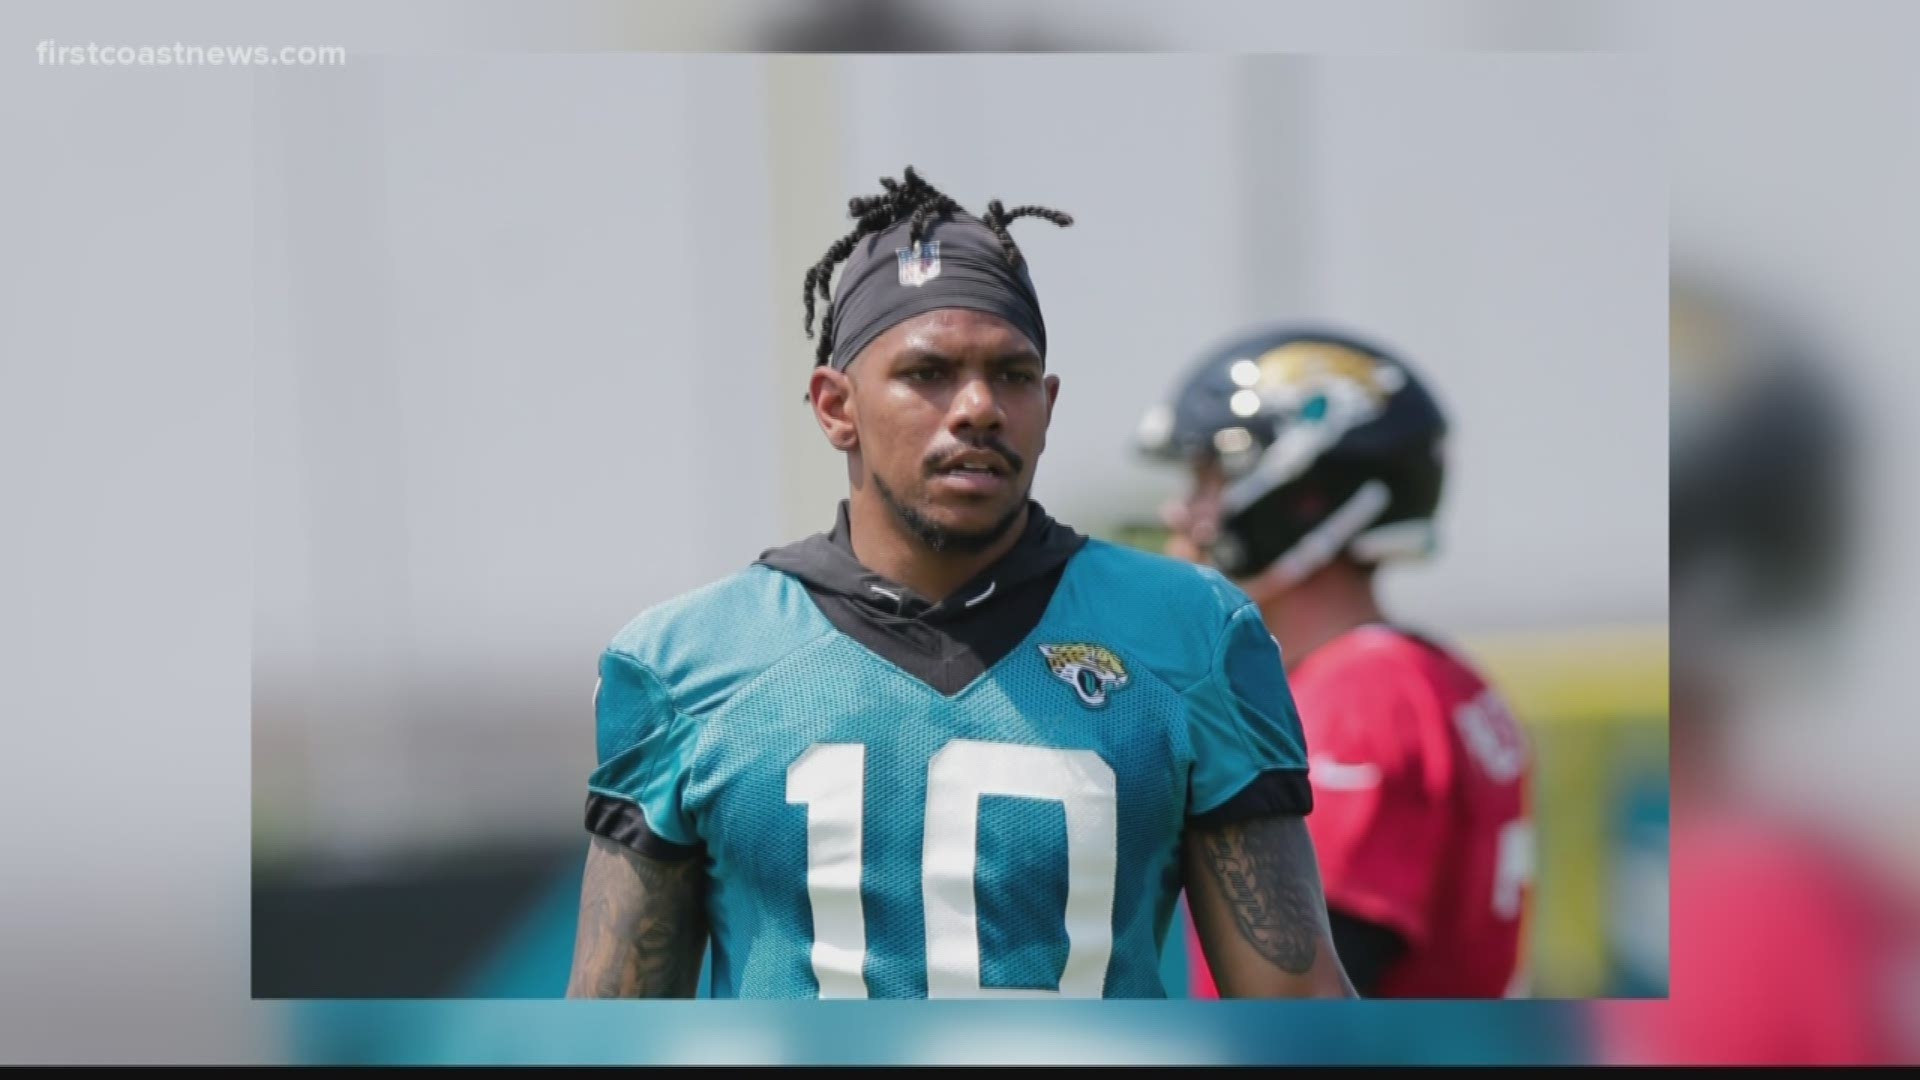 Former Jaguars wide receiver Terrelle Pryor was stabbed Friday at his Pittsburgh apartment, according to reports.